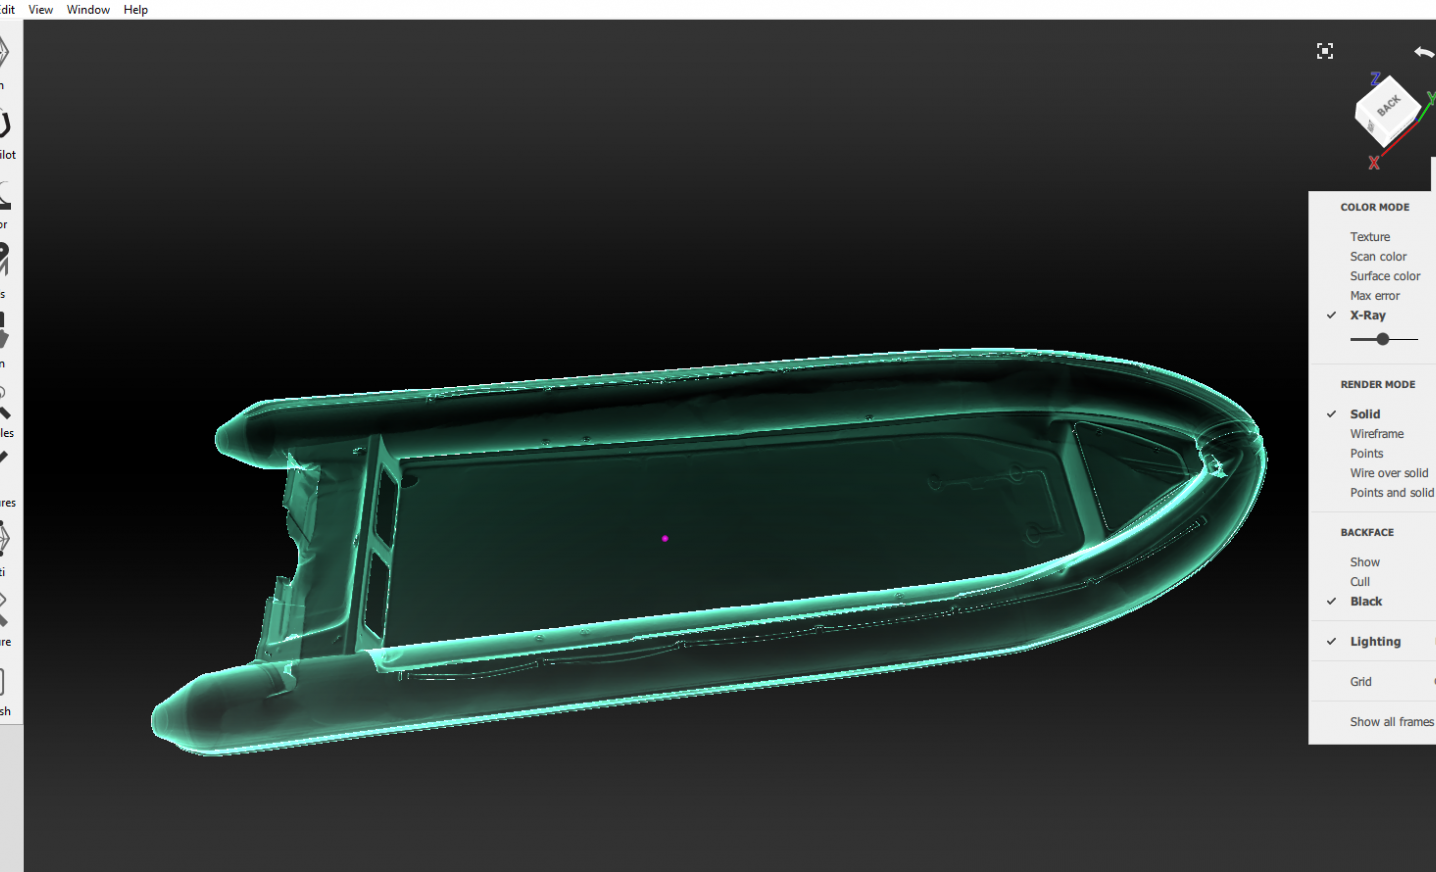 3D Scan of a 24 foot RIB boat